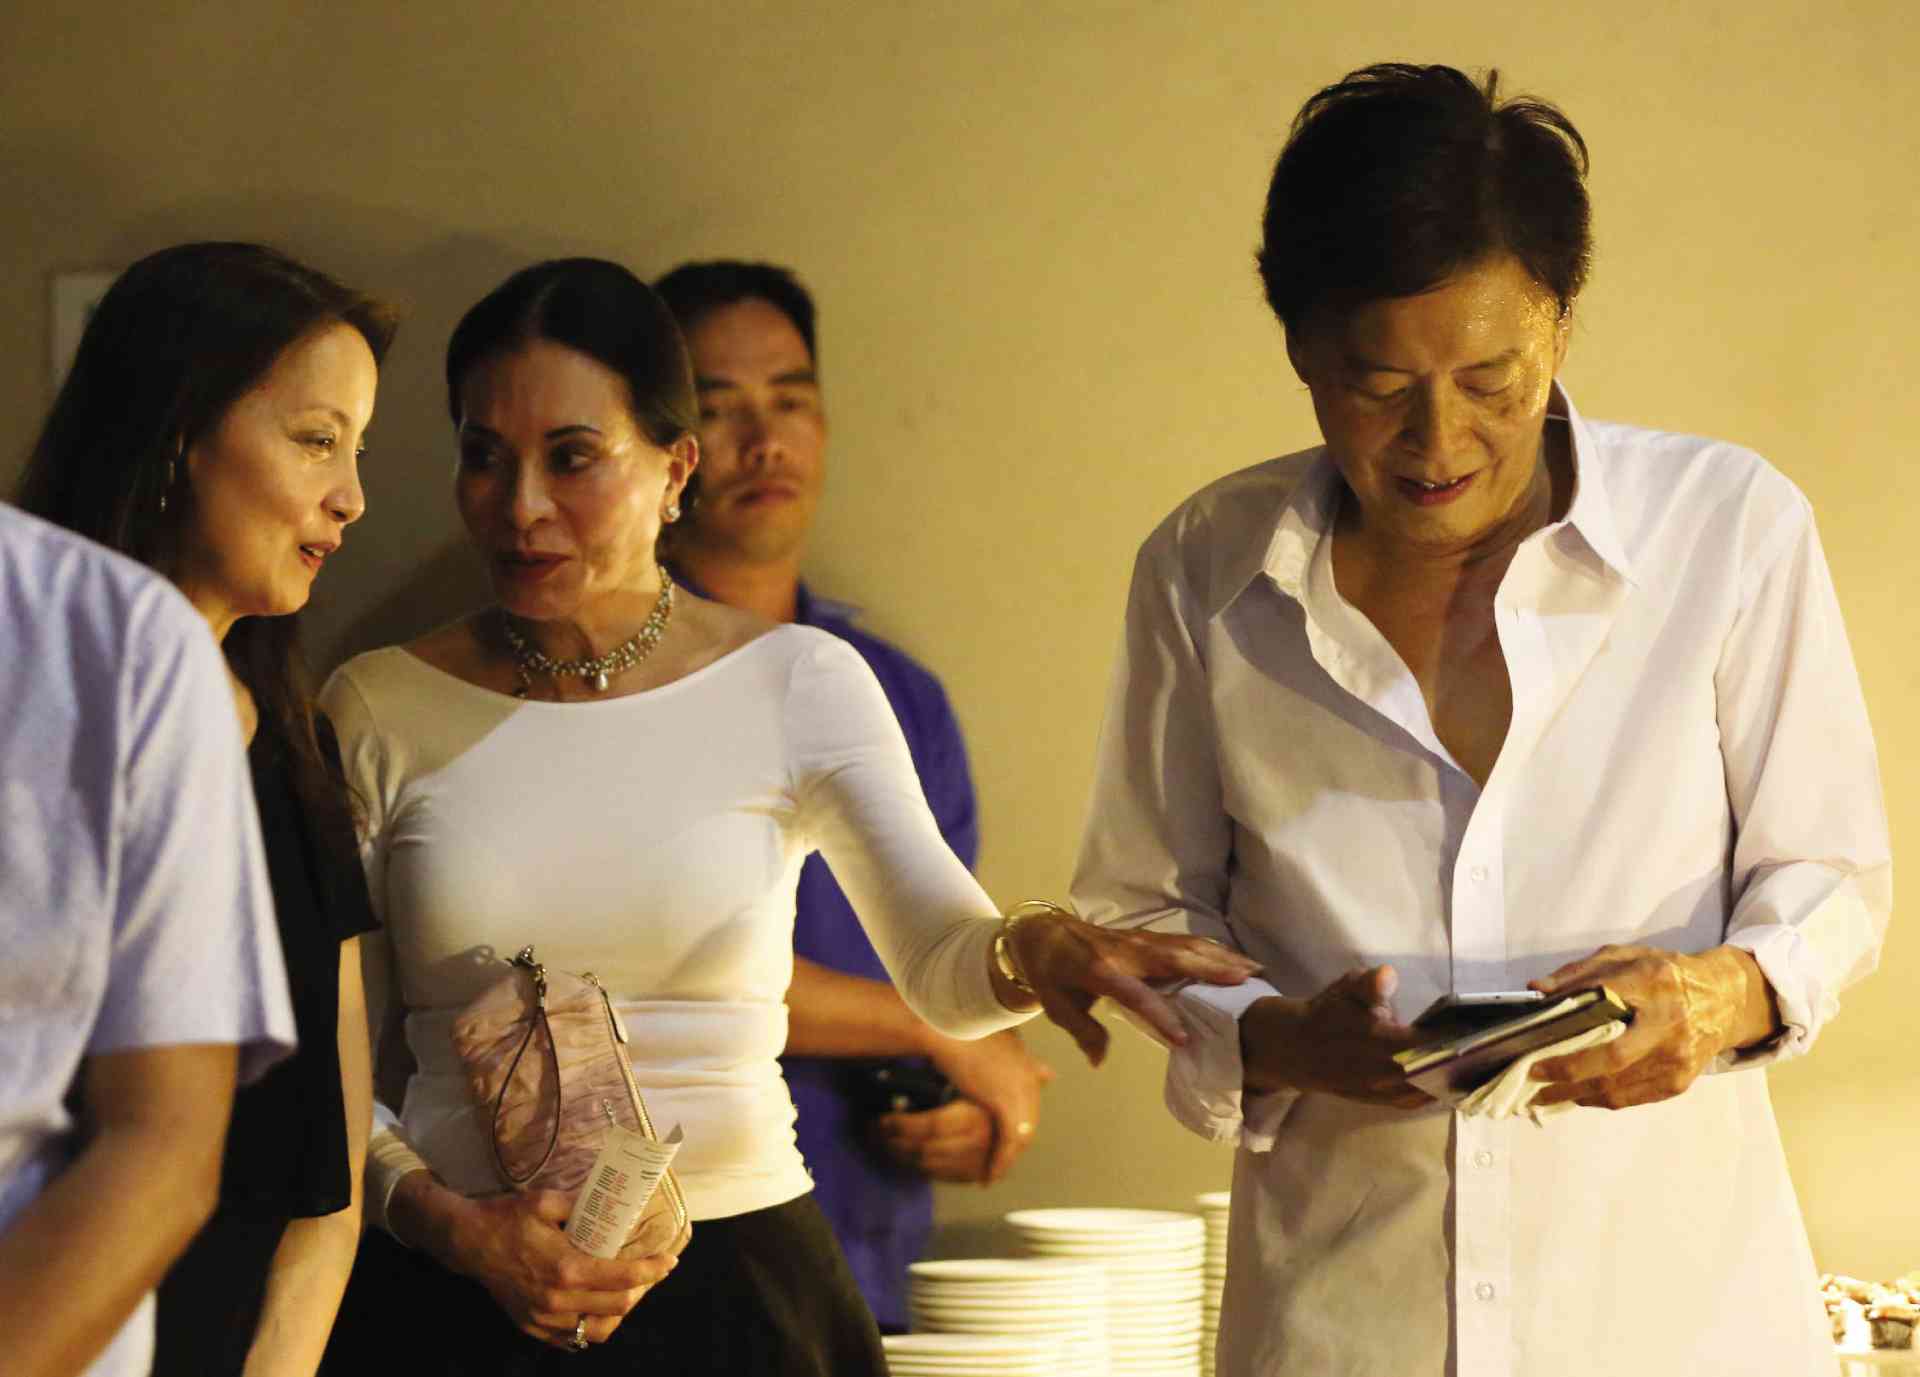 Family friend Tingting Cojuangco (in white blouse) condoles with Ilusorio siblings Ramon and Shereen at the memorial service (above).